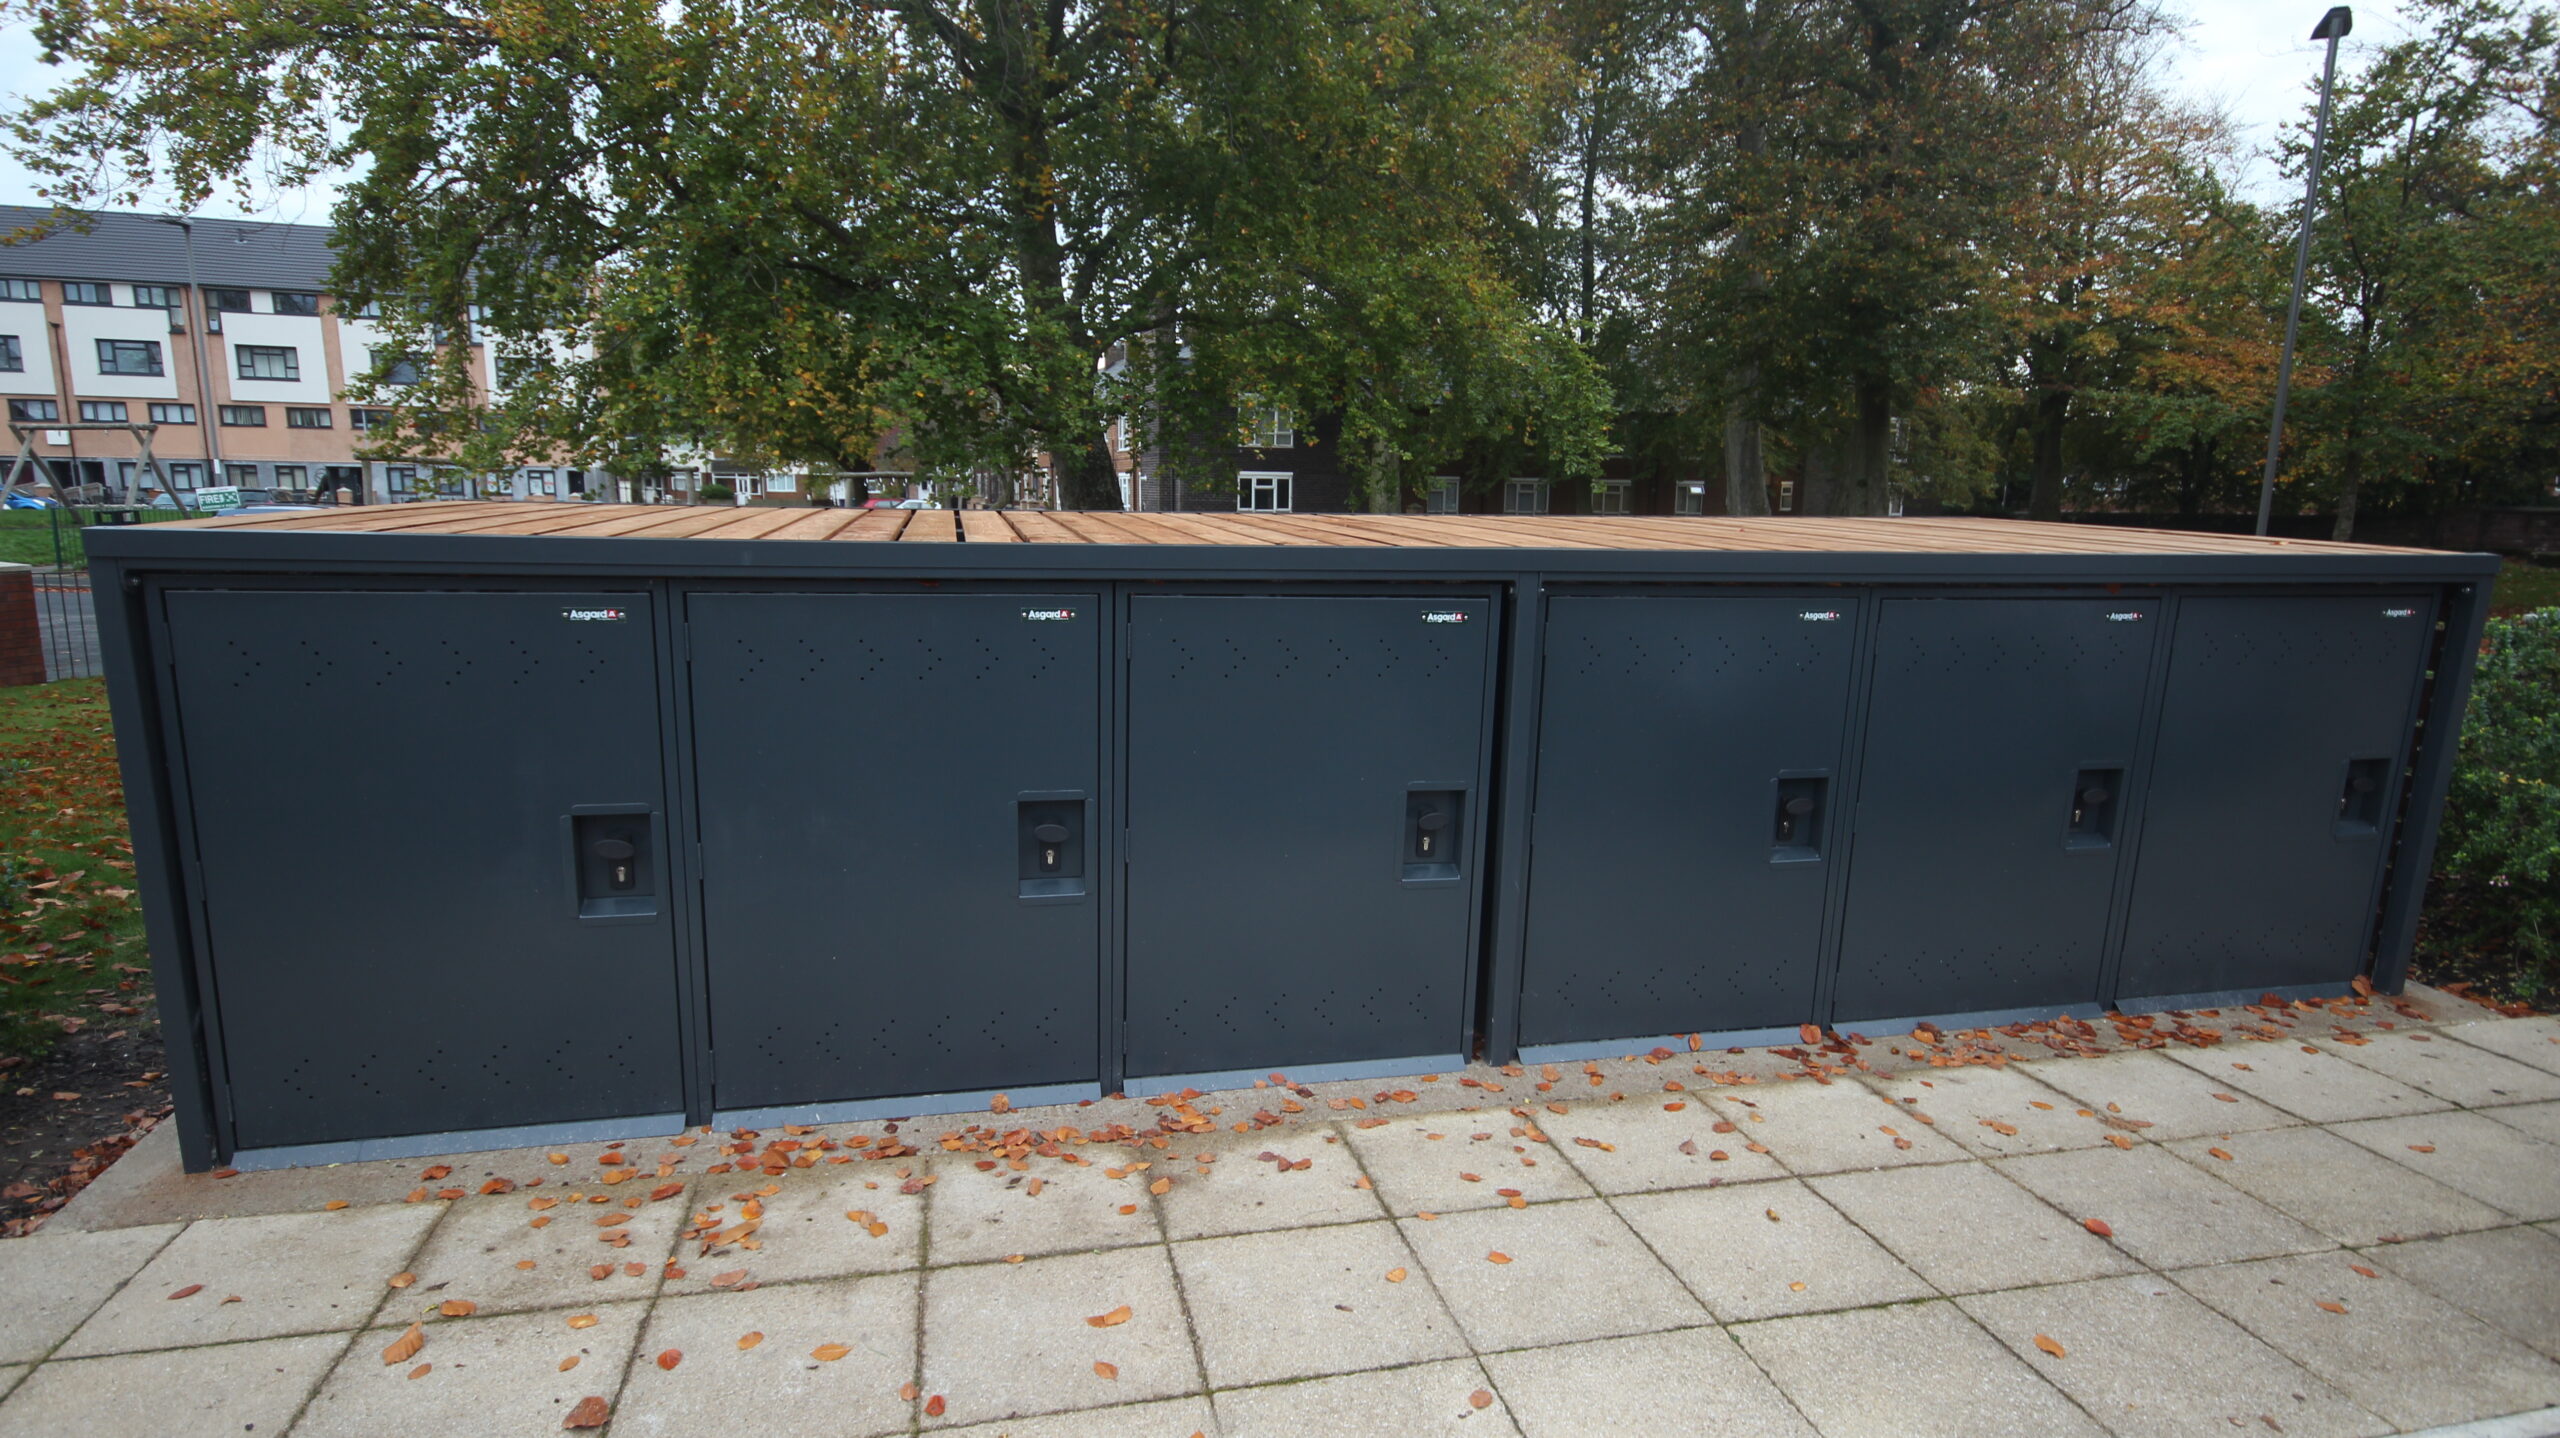 Secure Cycle Store's newly installed, 2 bike lockers with a bespoke timber clad facade housing 6 lockers. Outdoors, adjacent to the residential car park.